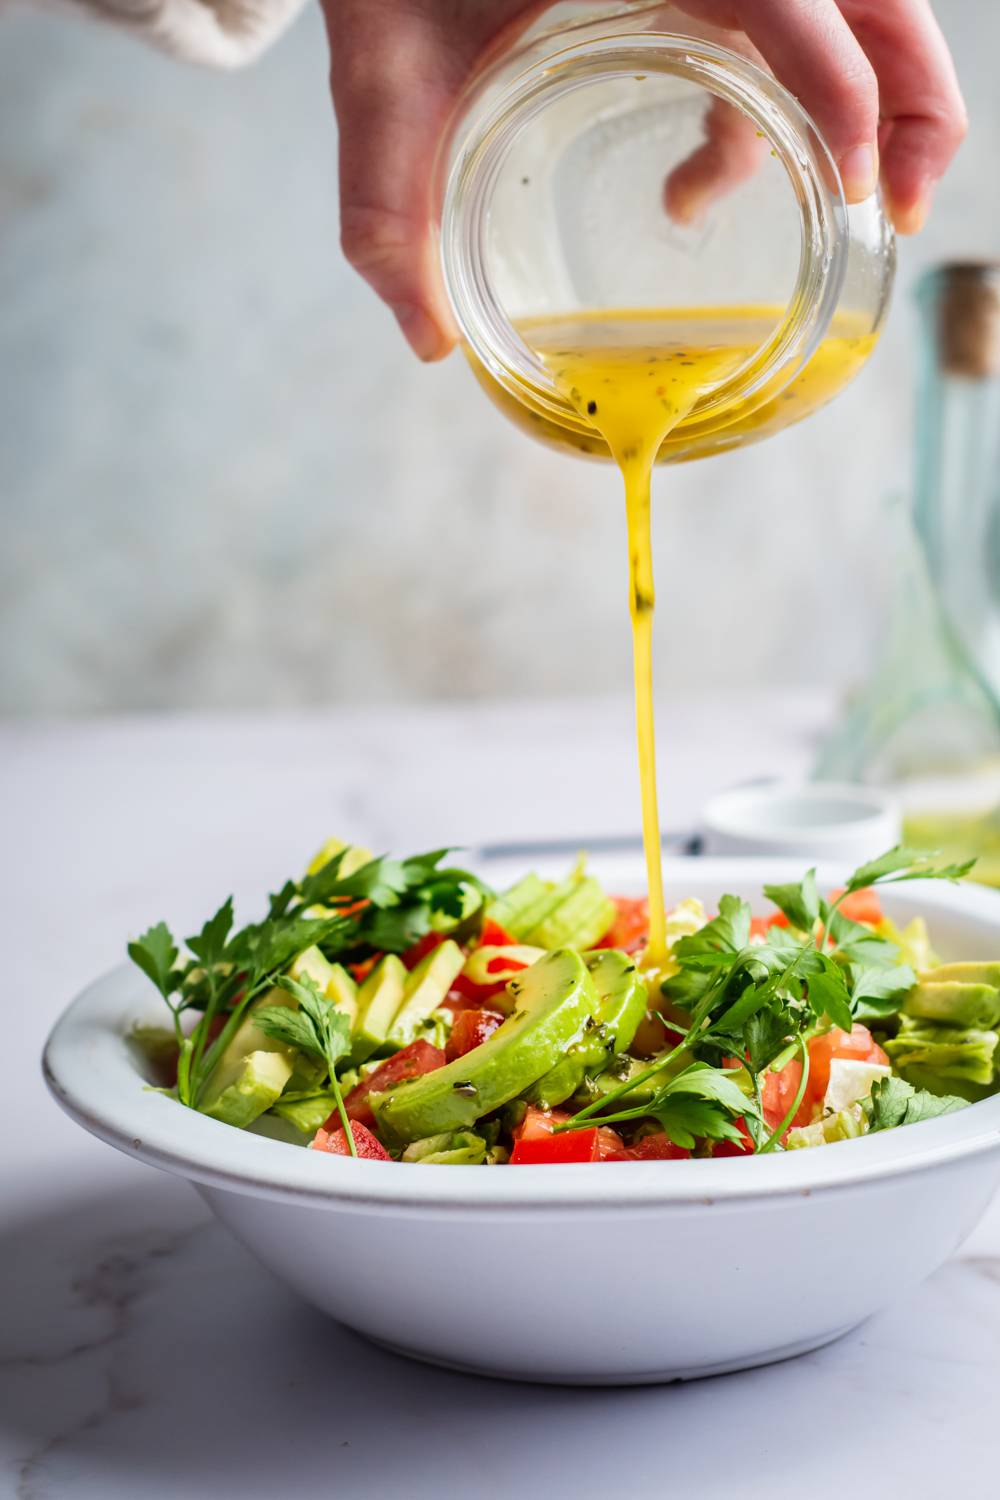 Italian dressing being poured over a salad with avocado, tomatoes, and herbs.